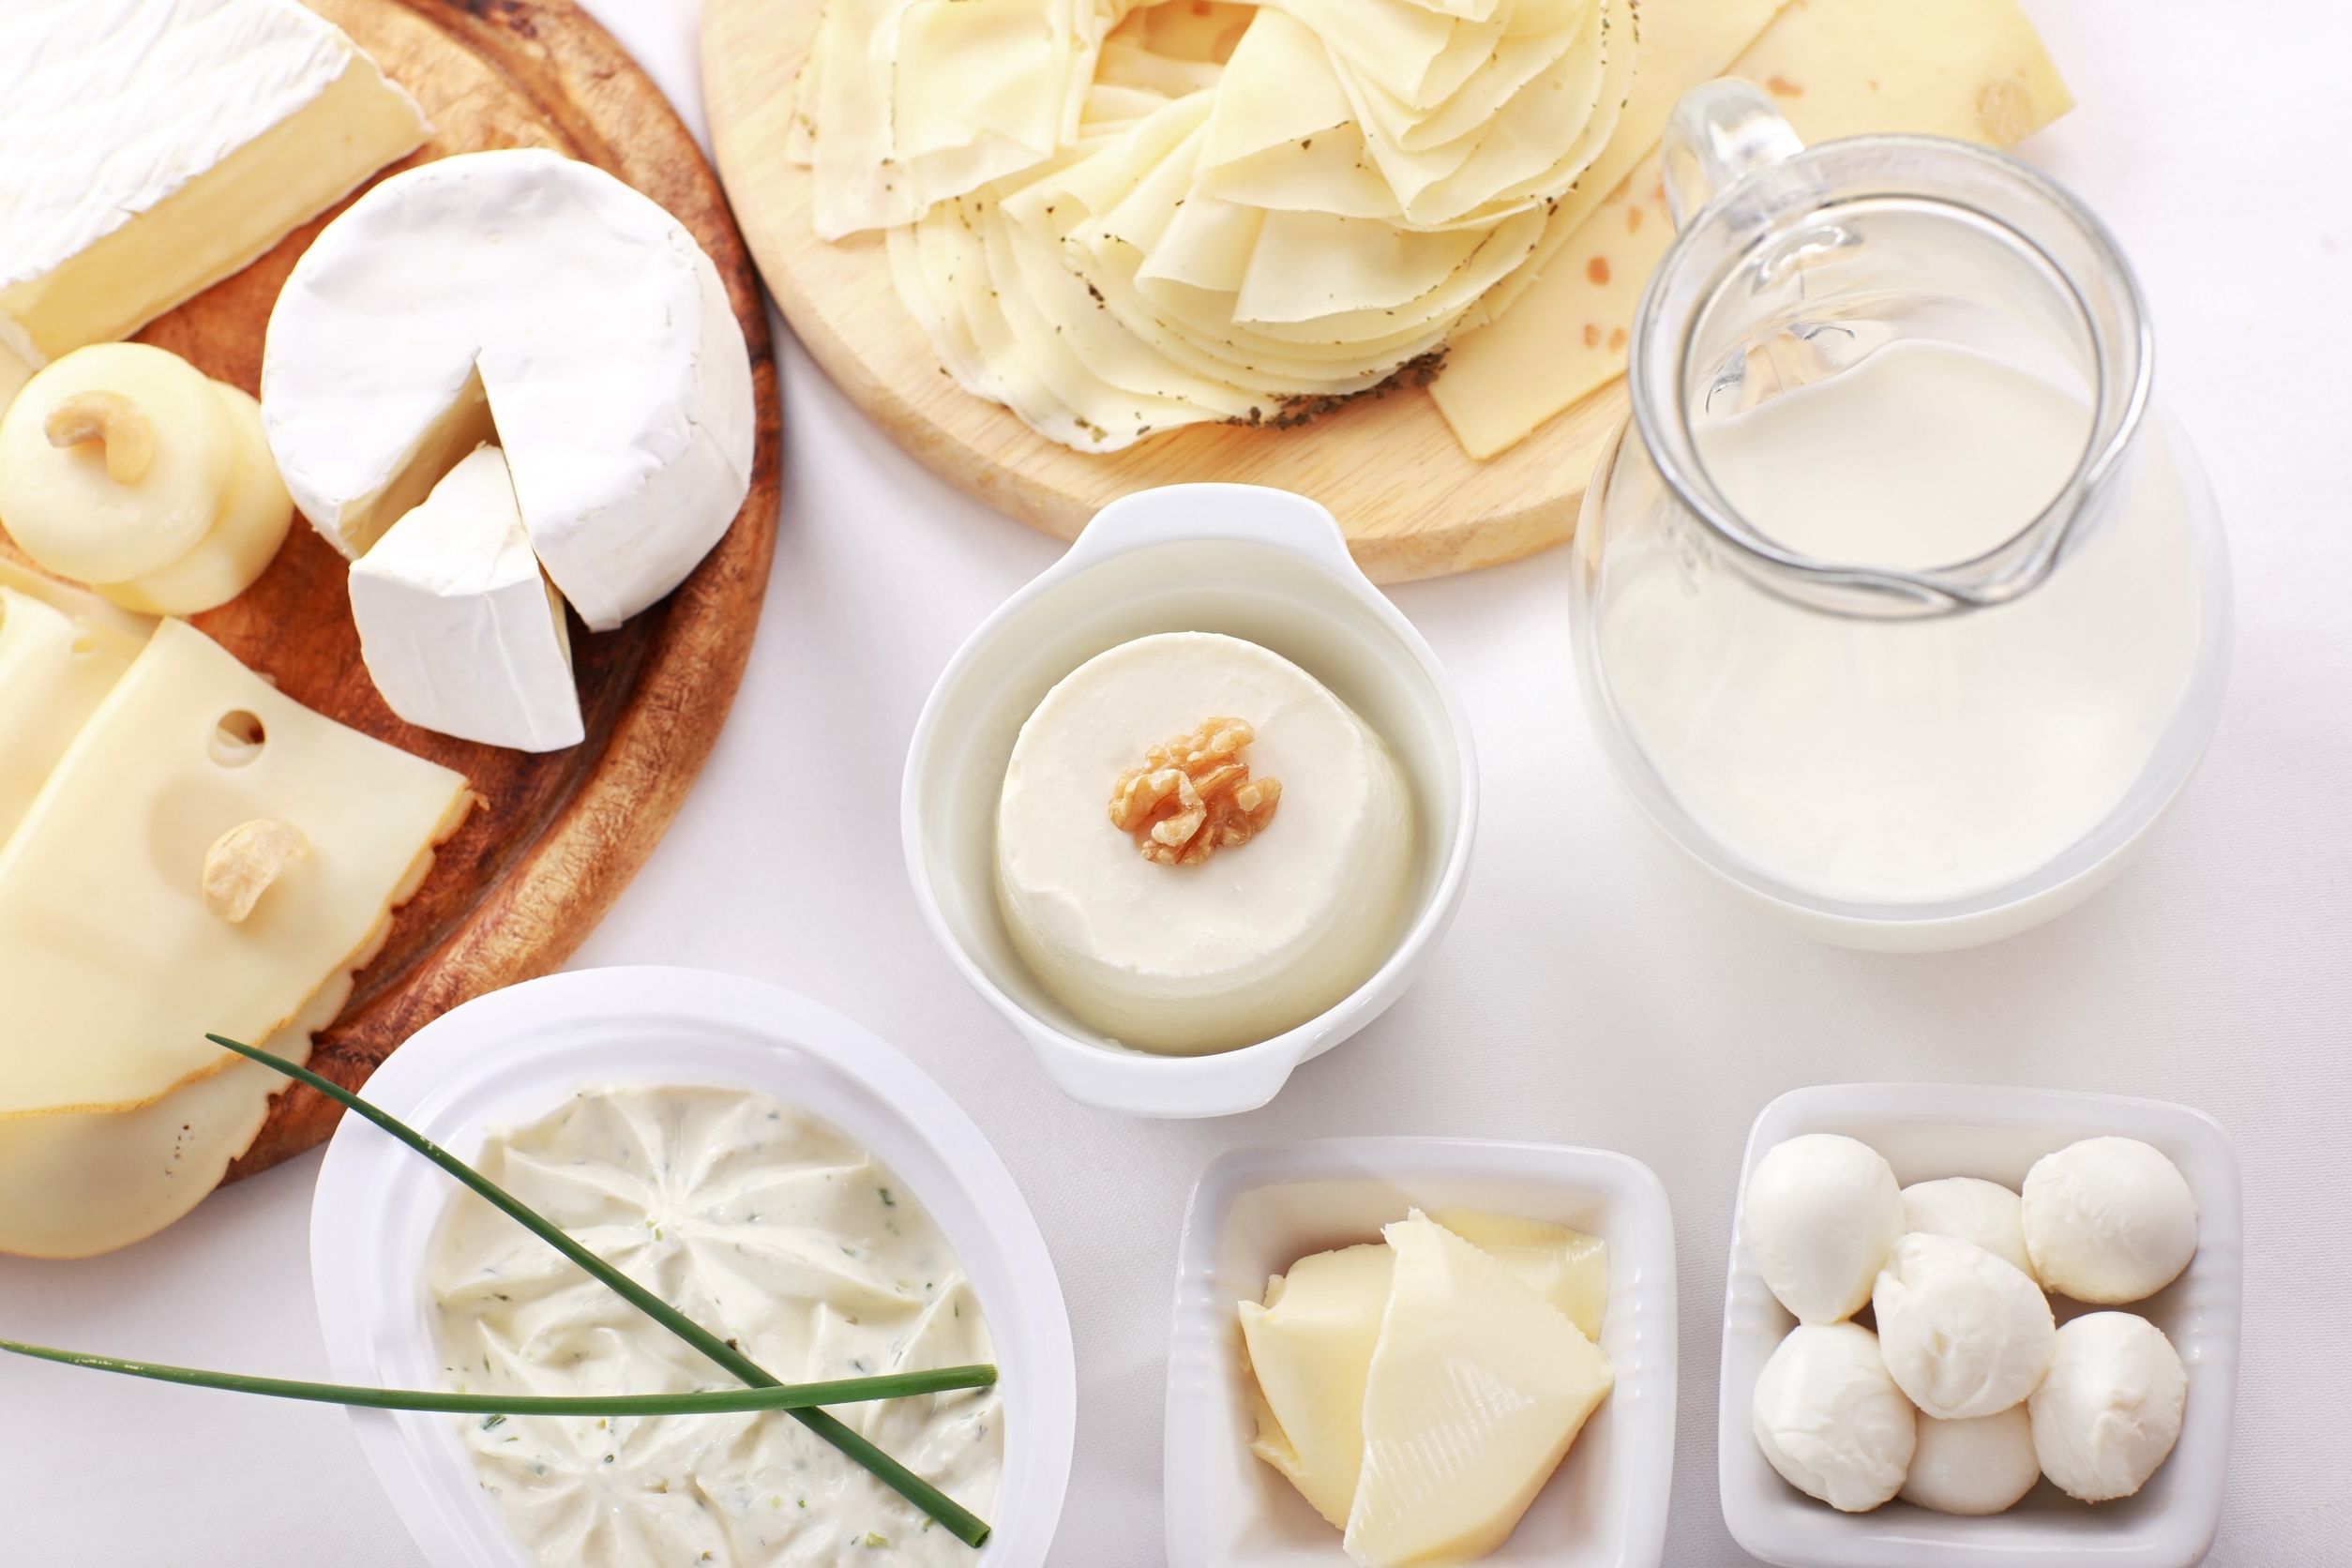 Supplier of cheesemaking supplies, cheese cultures, molds, lipase